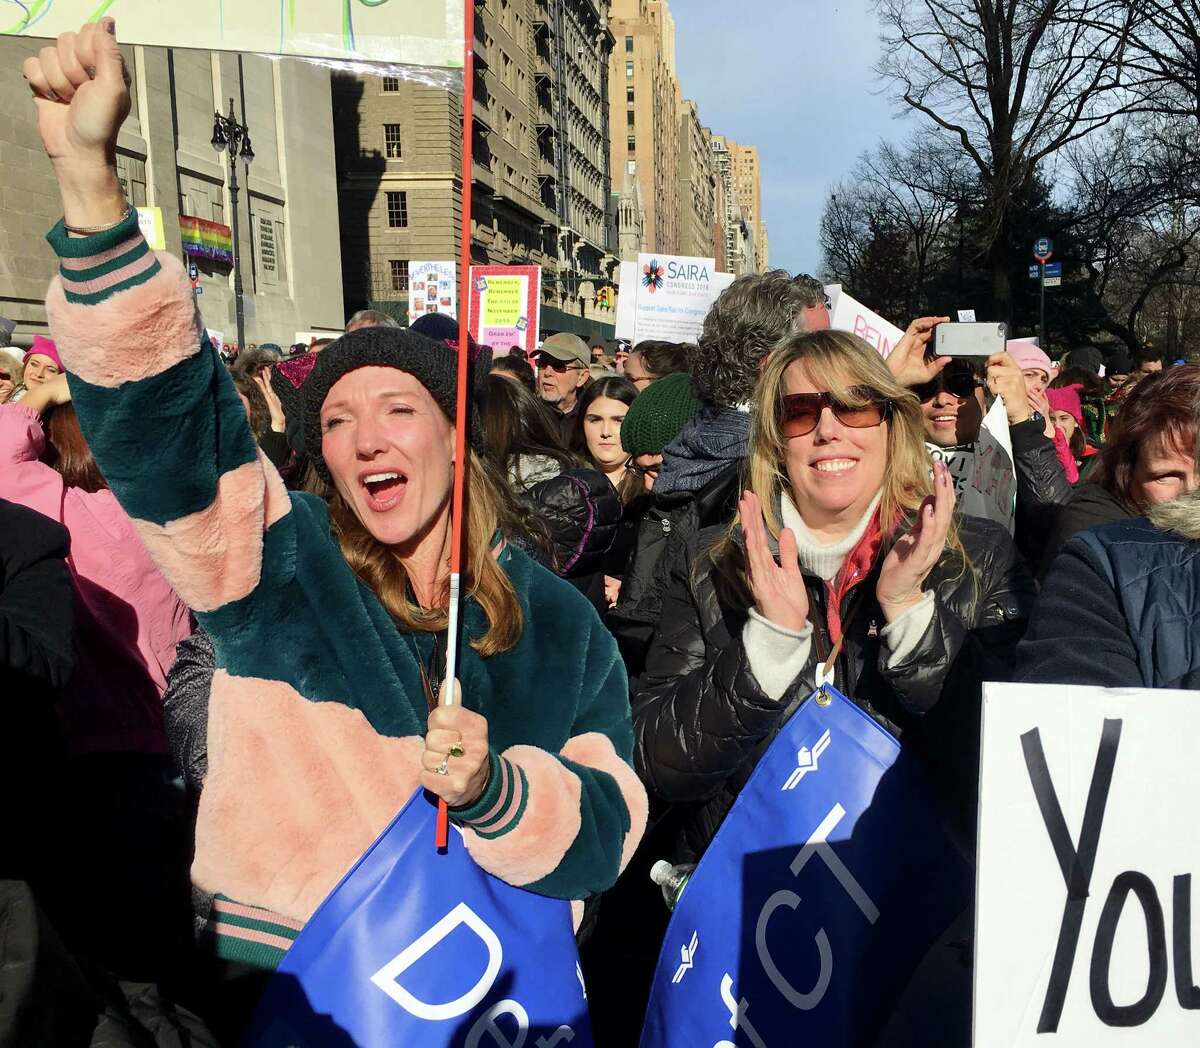 Darcy Hicks, left, of Westport, and Laura Totten of Stamford react to a speech by Whoopi Goldberg in the New York Women's March 2018. Hicks founded DefenDemocracy of Connecticut, a political action group, after the 2017 Women’s March.